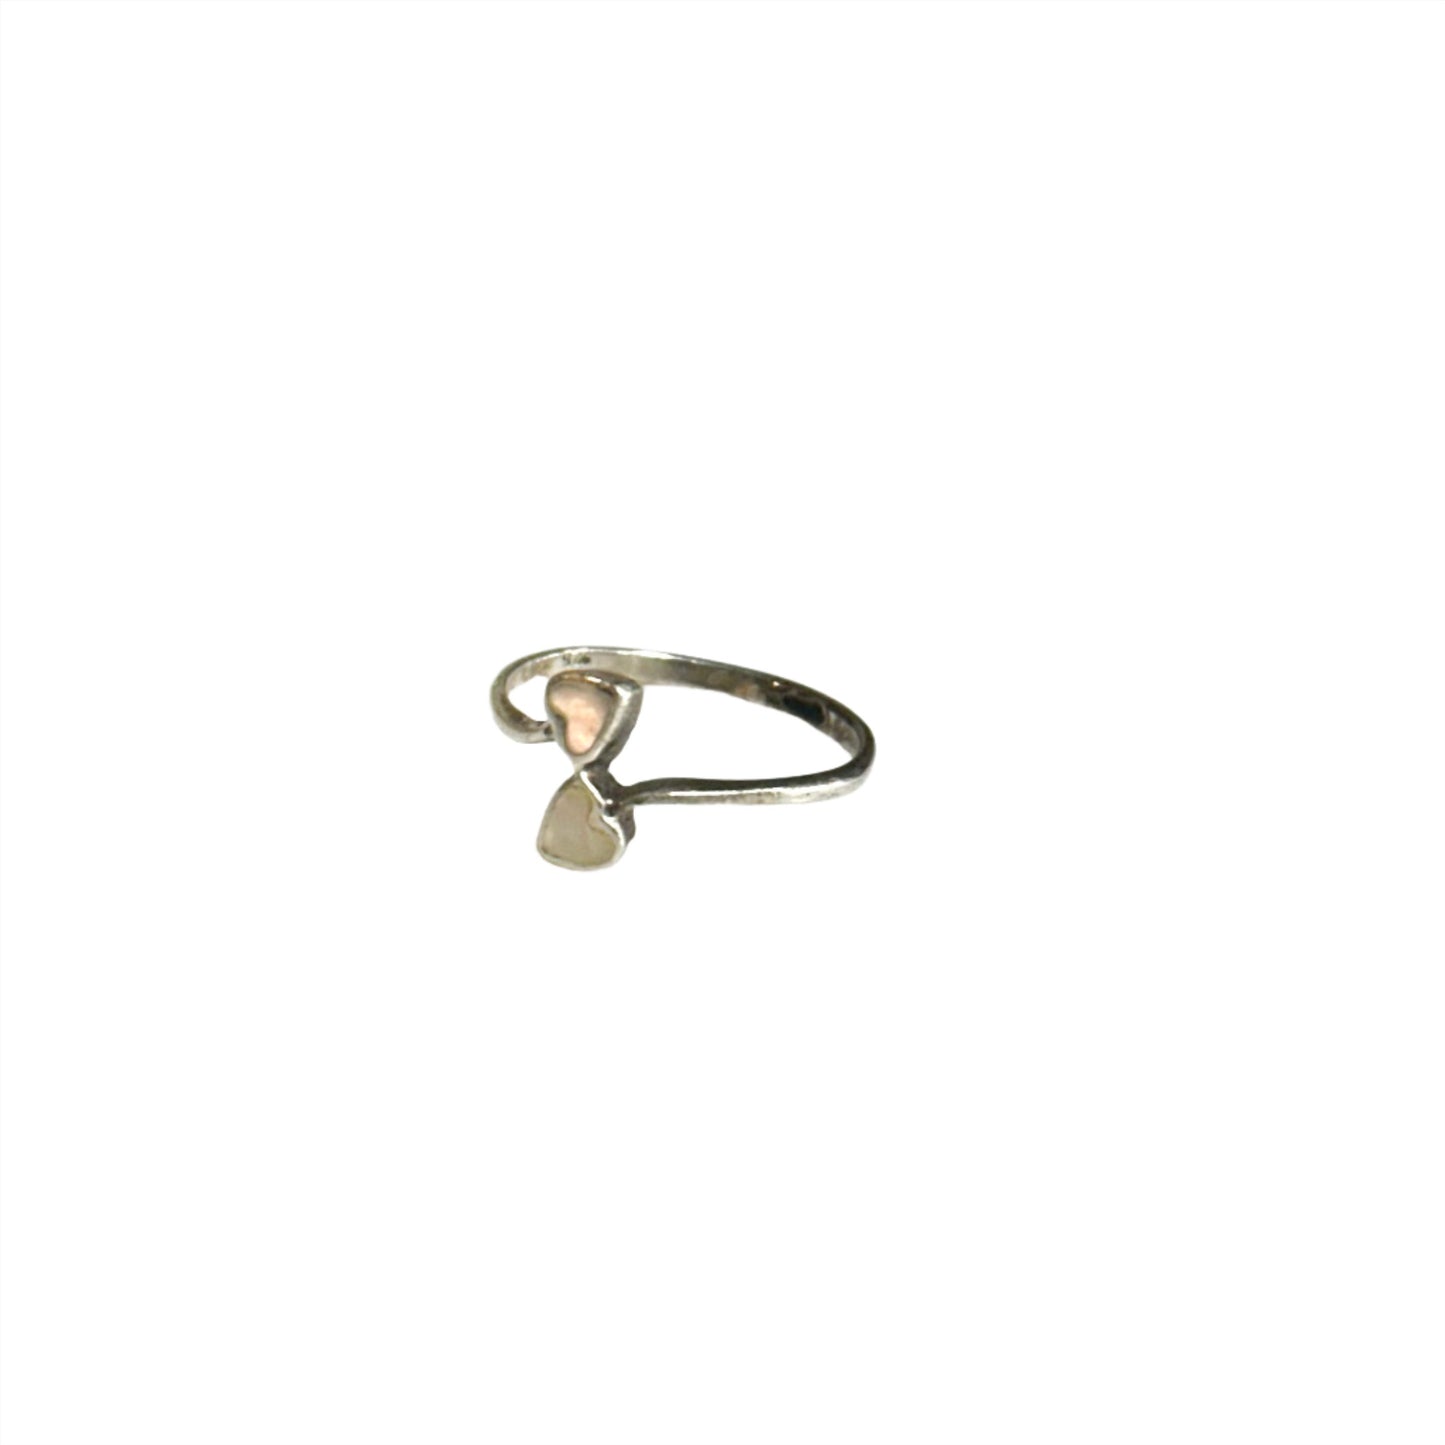 Ring Sterling Silver Size: 5